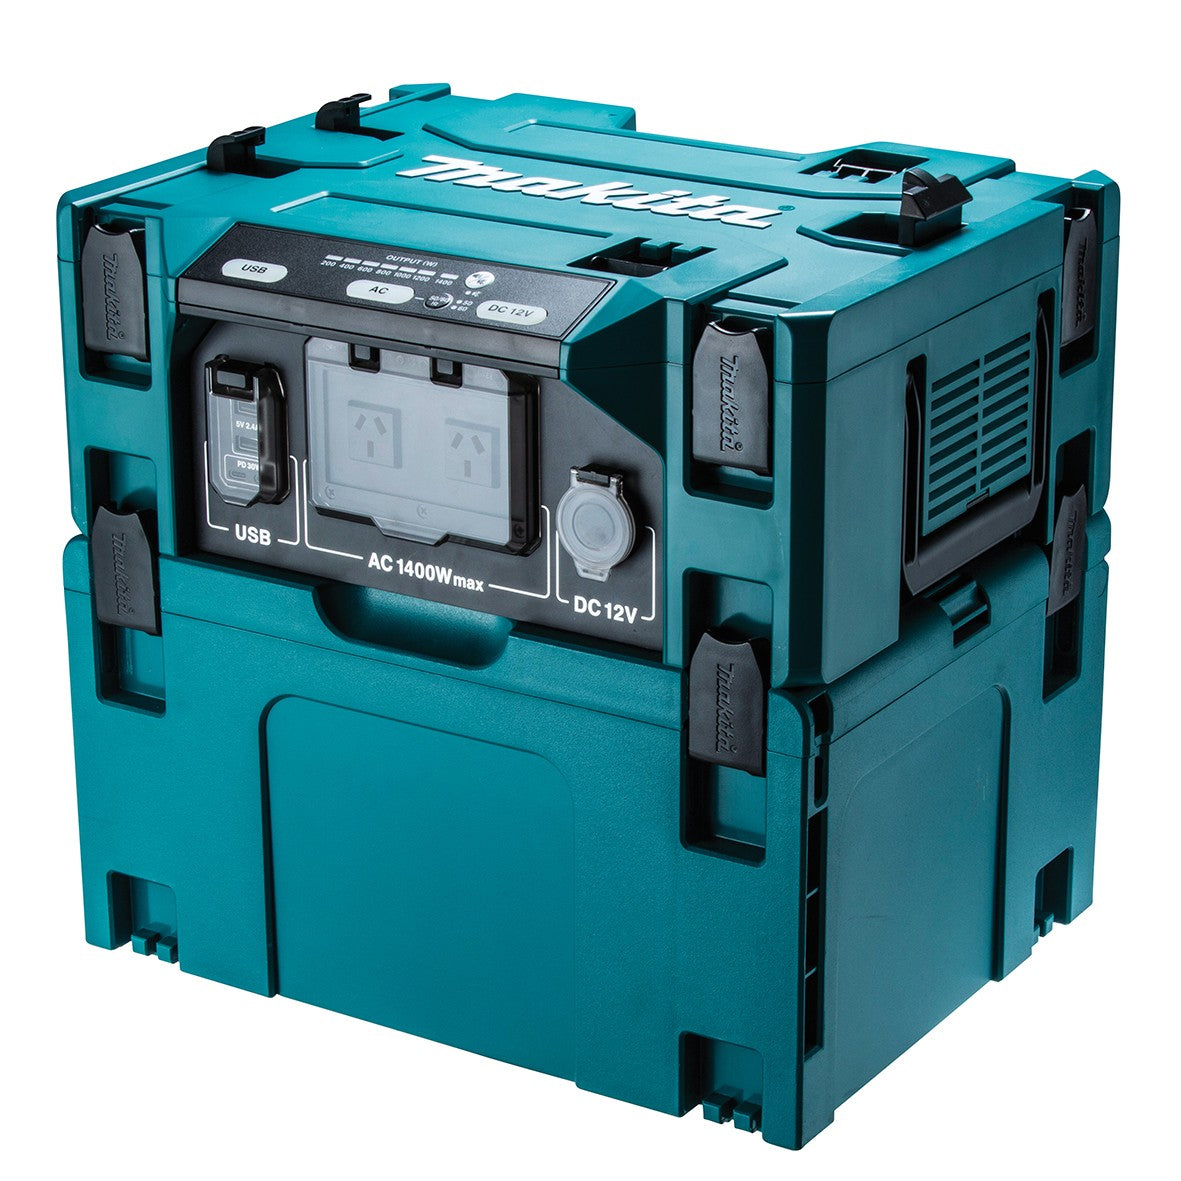 Direct Connect Inverter Power Supply AUABAC01 by Makita